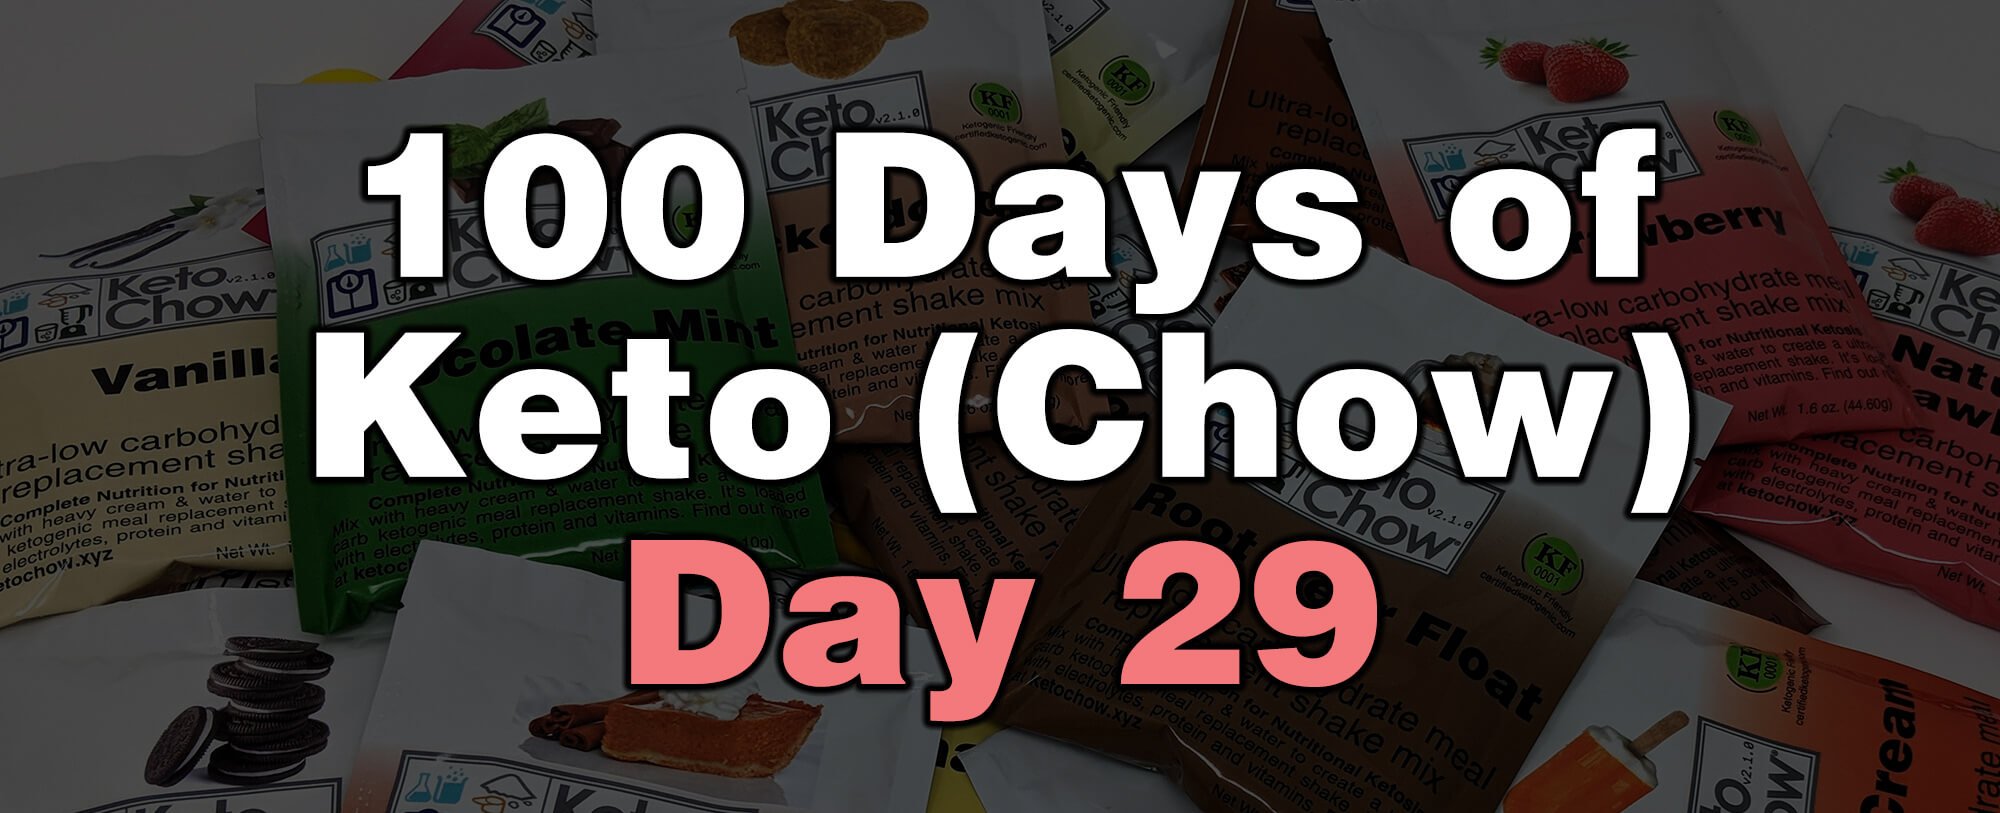 100 days of keto chow day 29